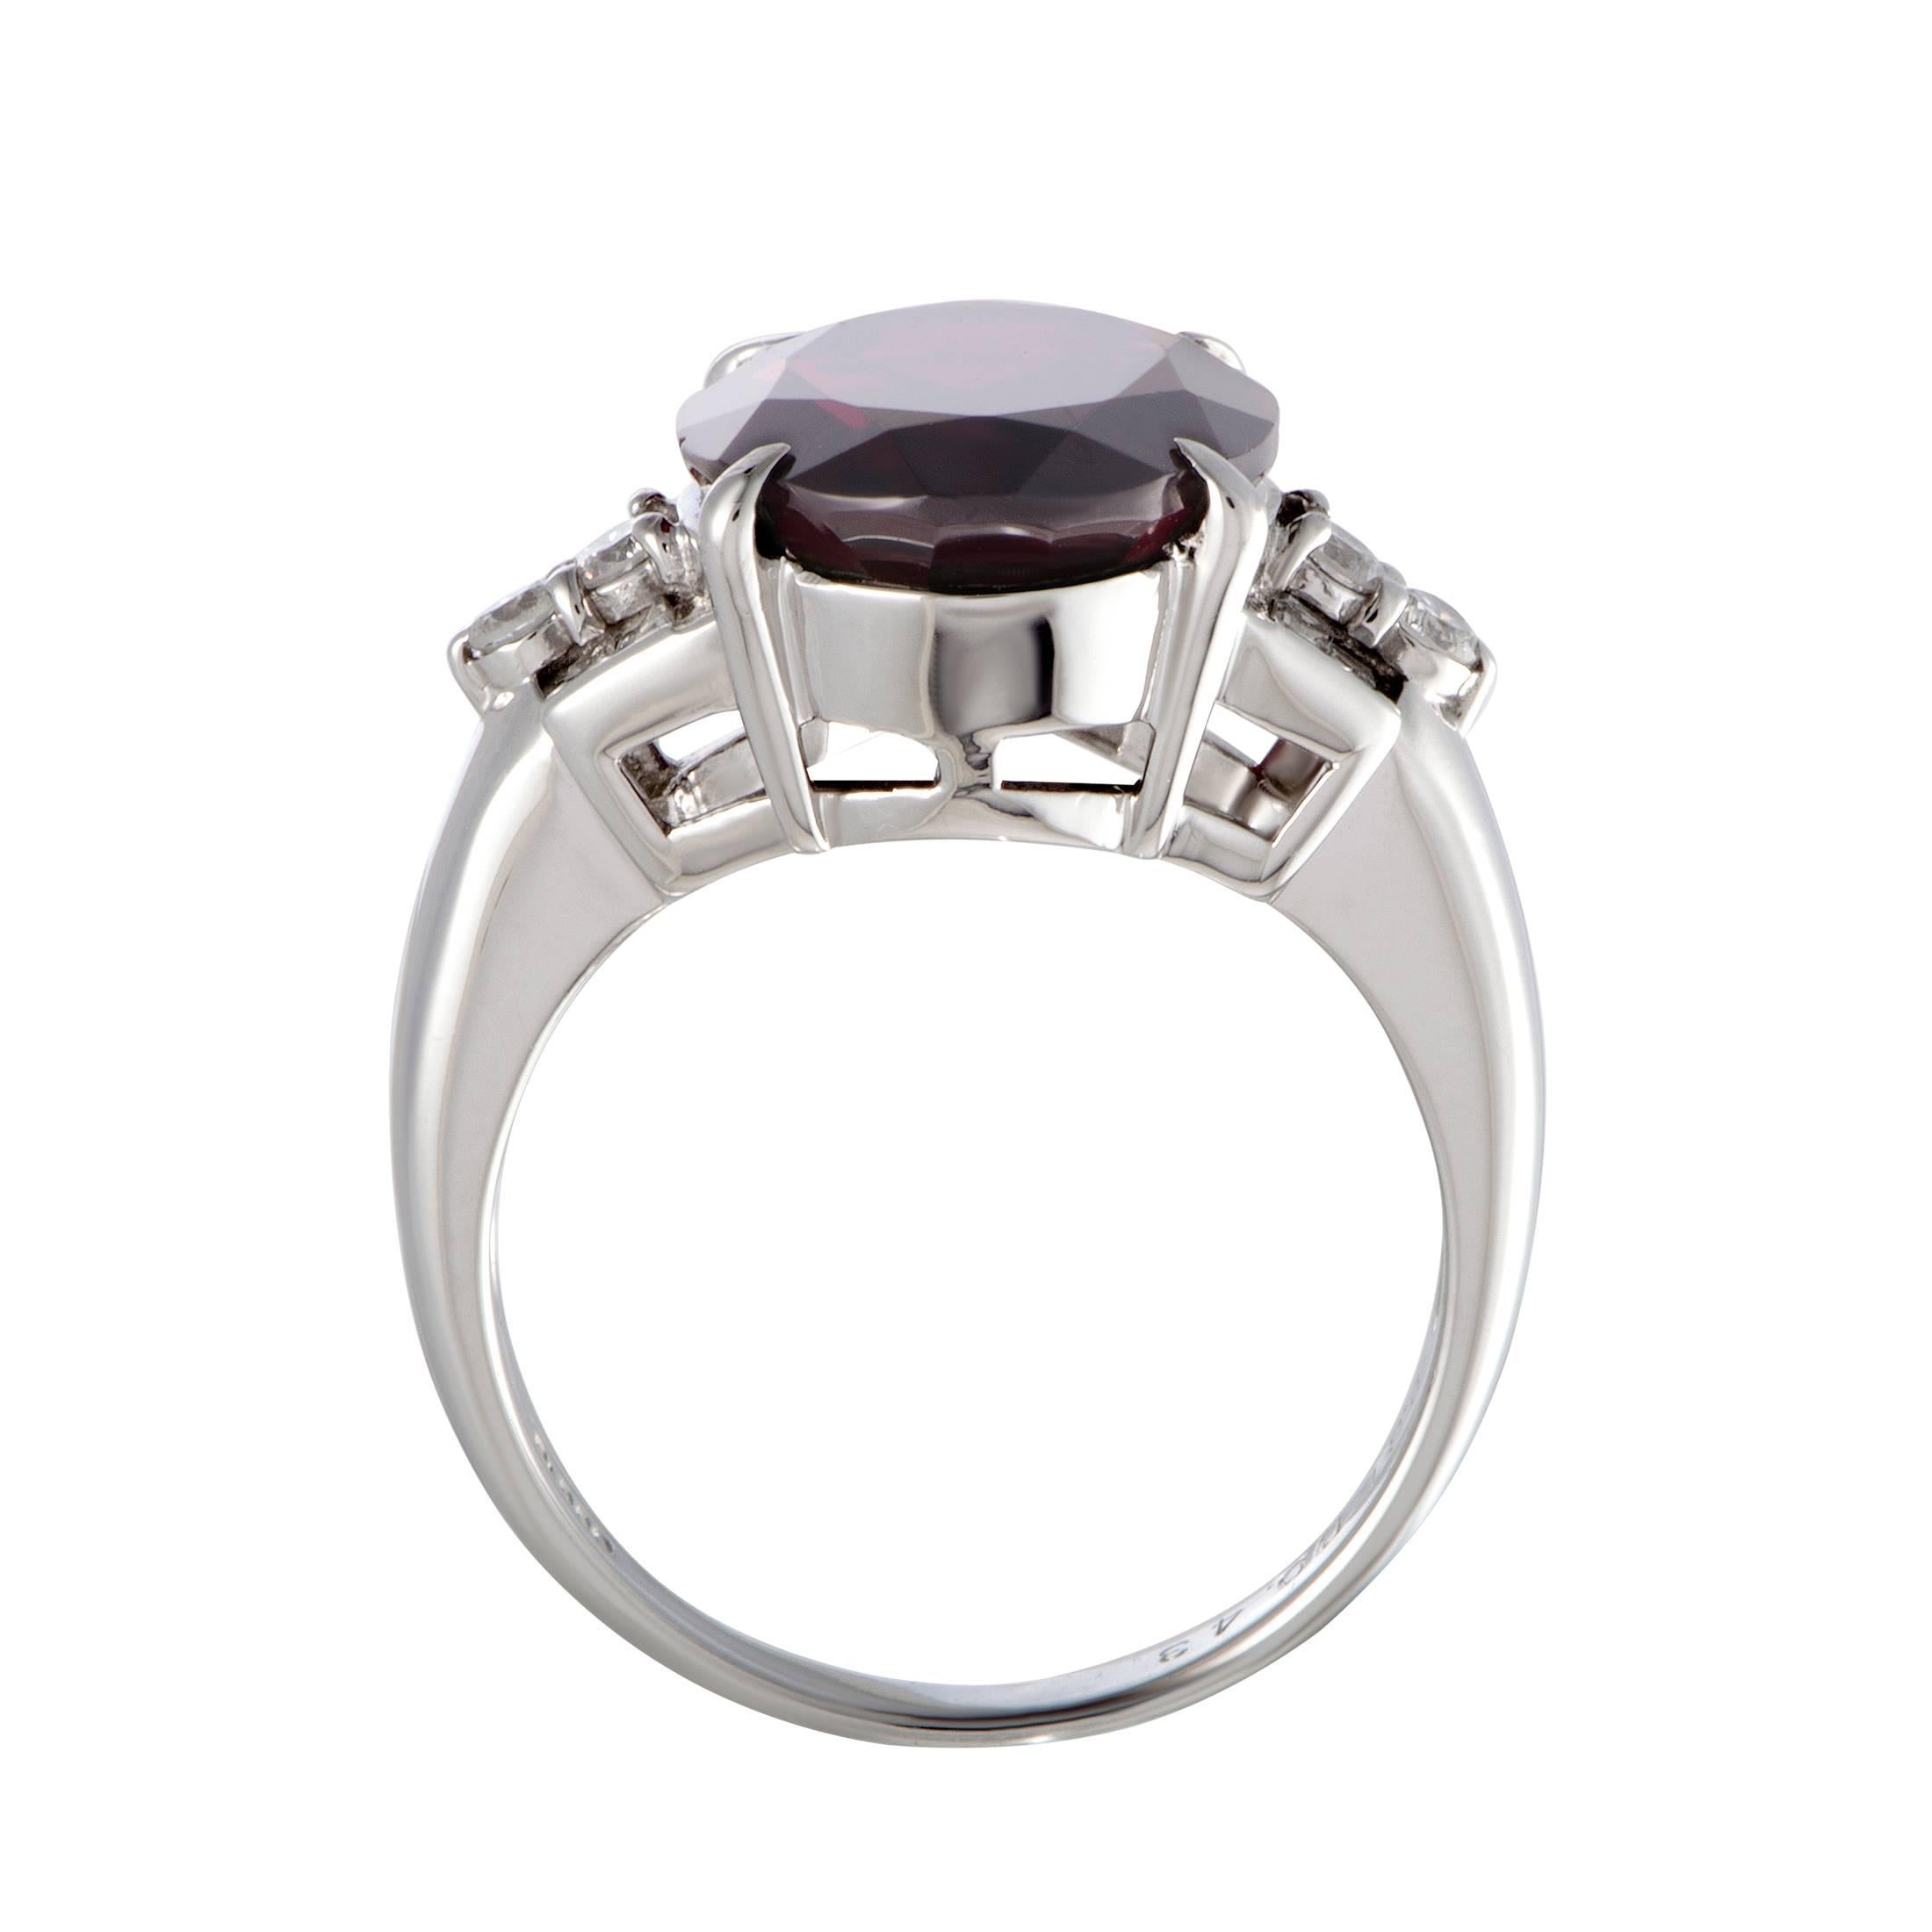 An incredibly bold design is topped off with an imposing garnet in this spectacular platinum ring. The ring is also set with gorgeous diamond stones that amount to 0.43 carats, while the garnet weighs 9.61 carats.
Ring Top Dimensions: 15mm x